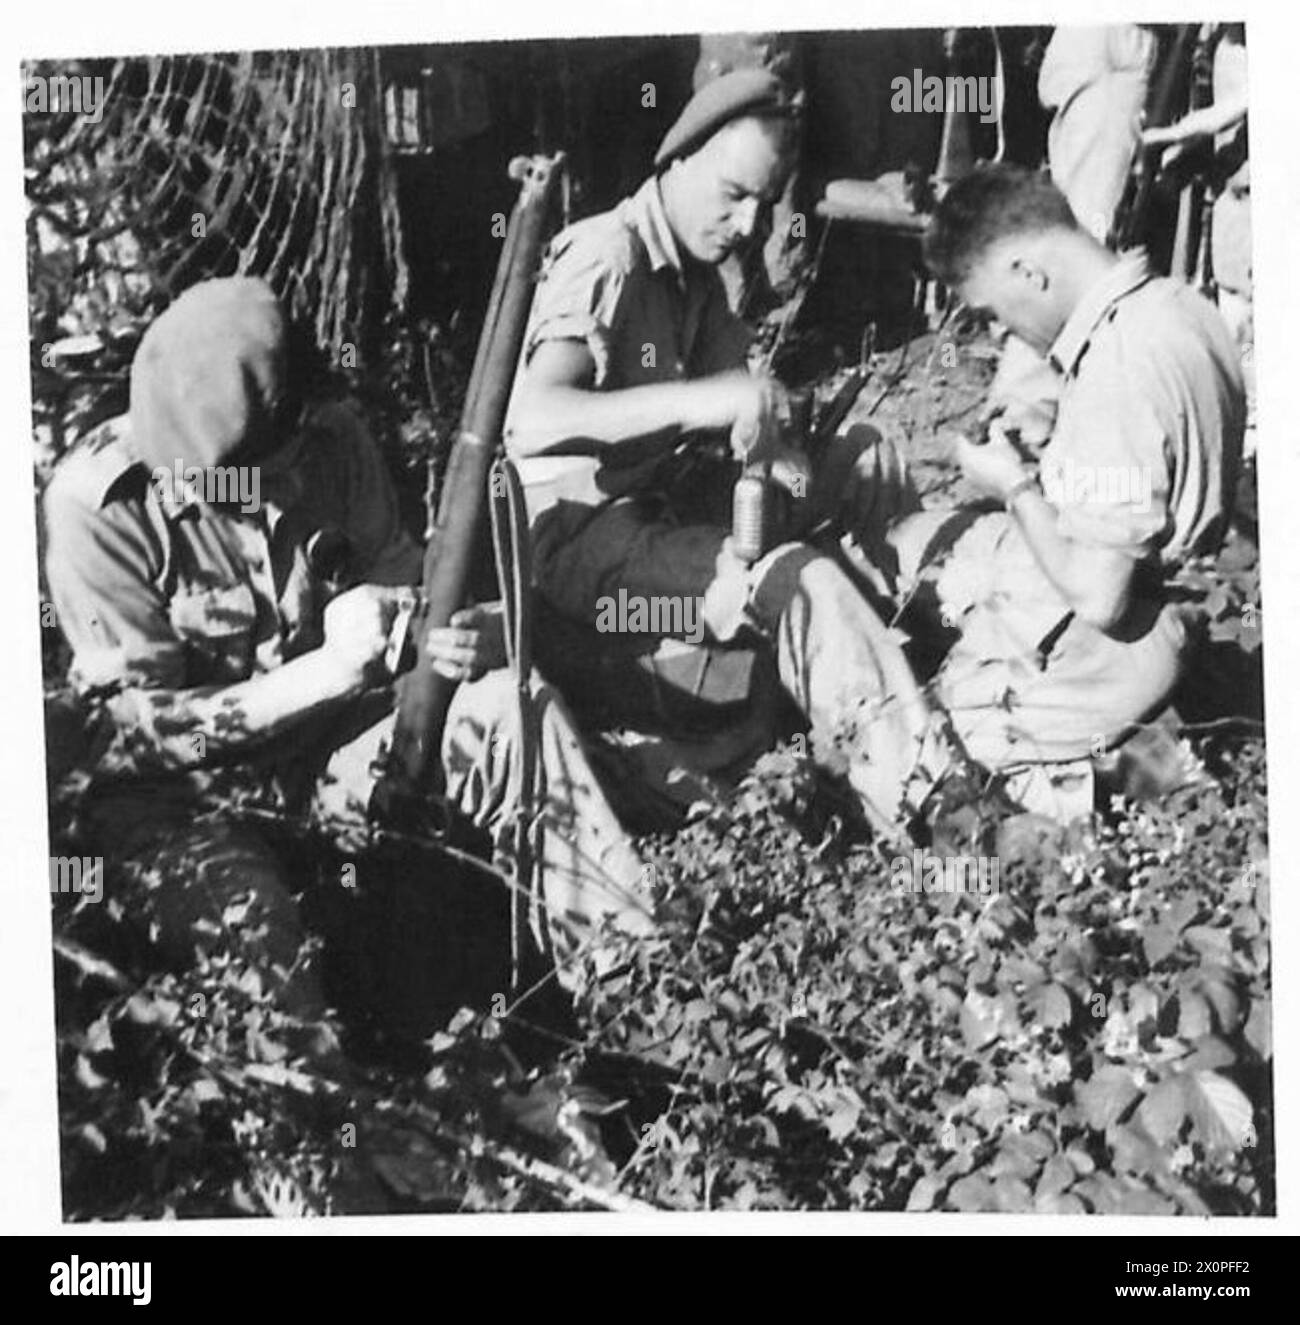 FIFTH ARMY : VARIOUS - Tpr. J. Burke of Hamilton, Scotland (left), Tpr. H. Gregory of 228 Sebert Road, Forest Gate, London, E. 7 and Dvr. M.A. Witcombe of 3/133 George Street, West Brookfields, Birmingham, 18 clean their weapons before setting out for the concentration area. Photographic negative , British Army Stock Photo